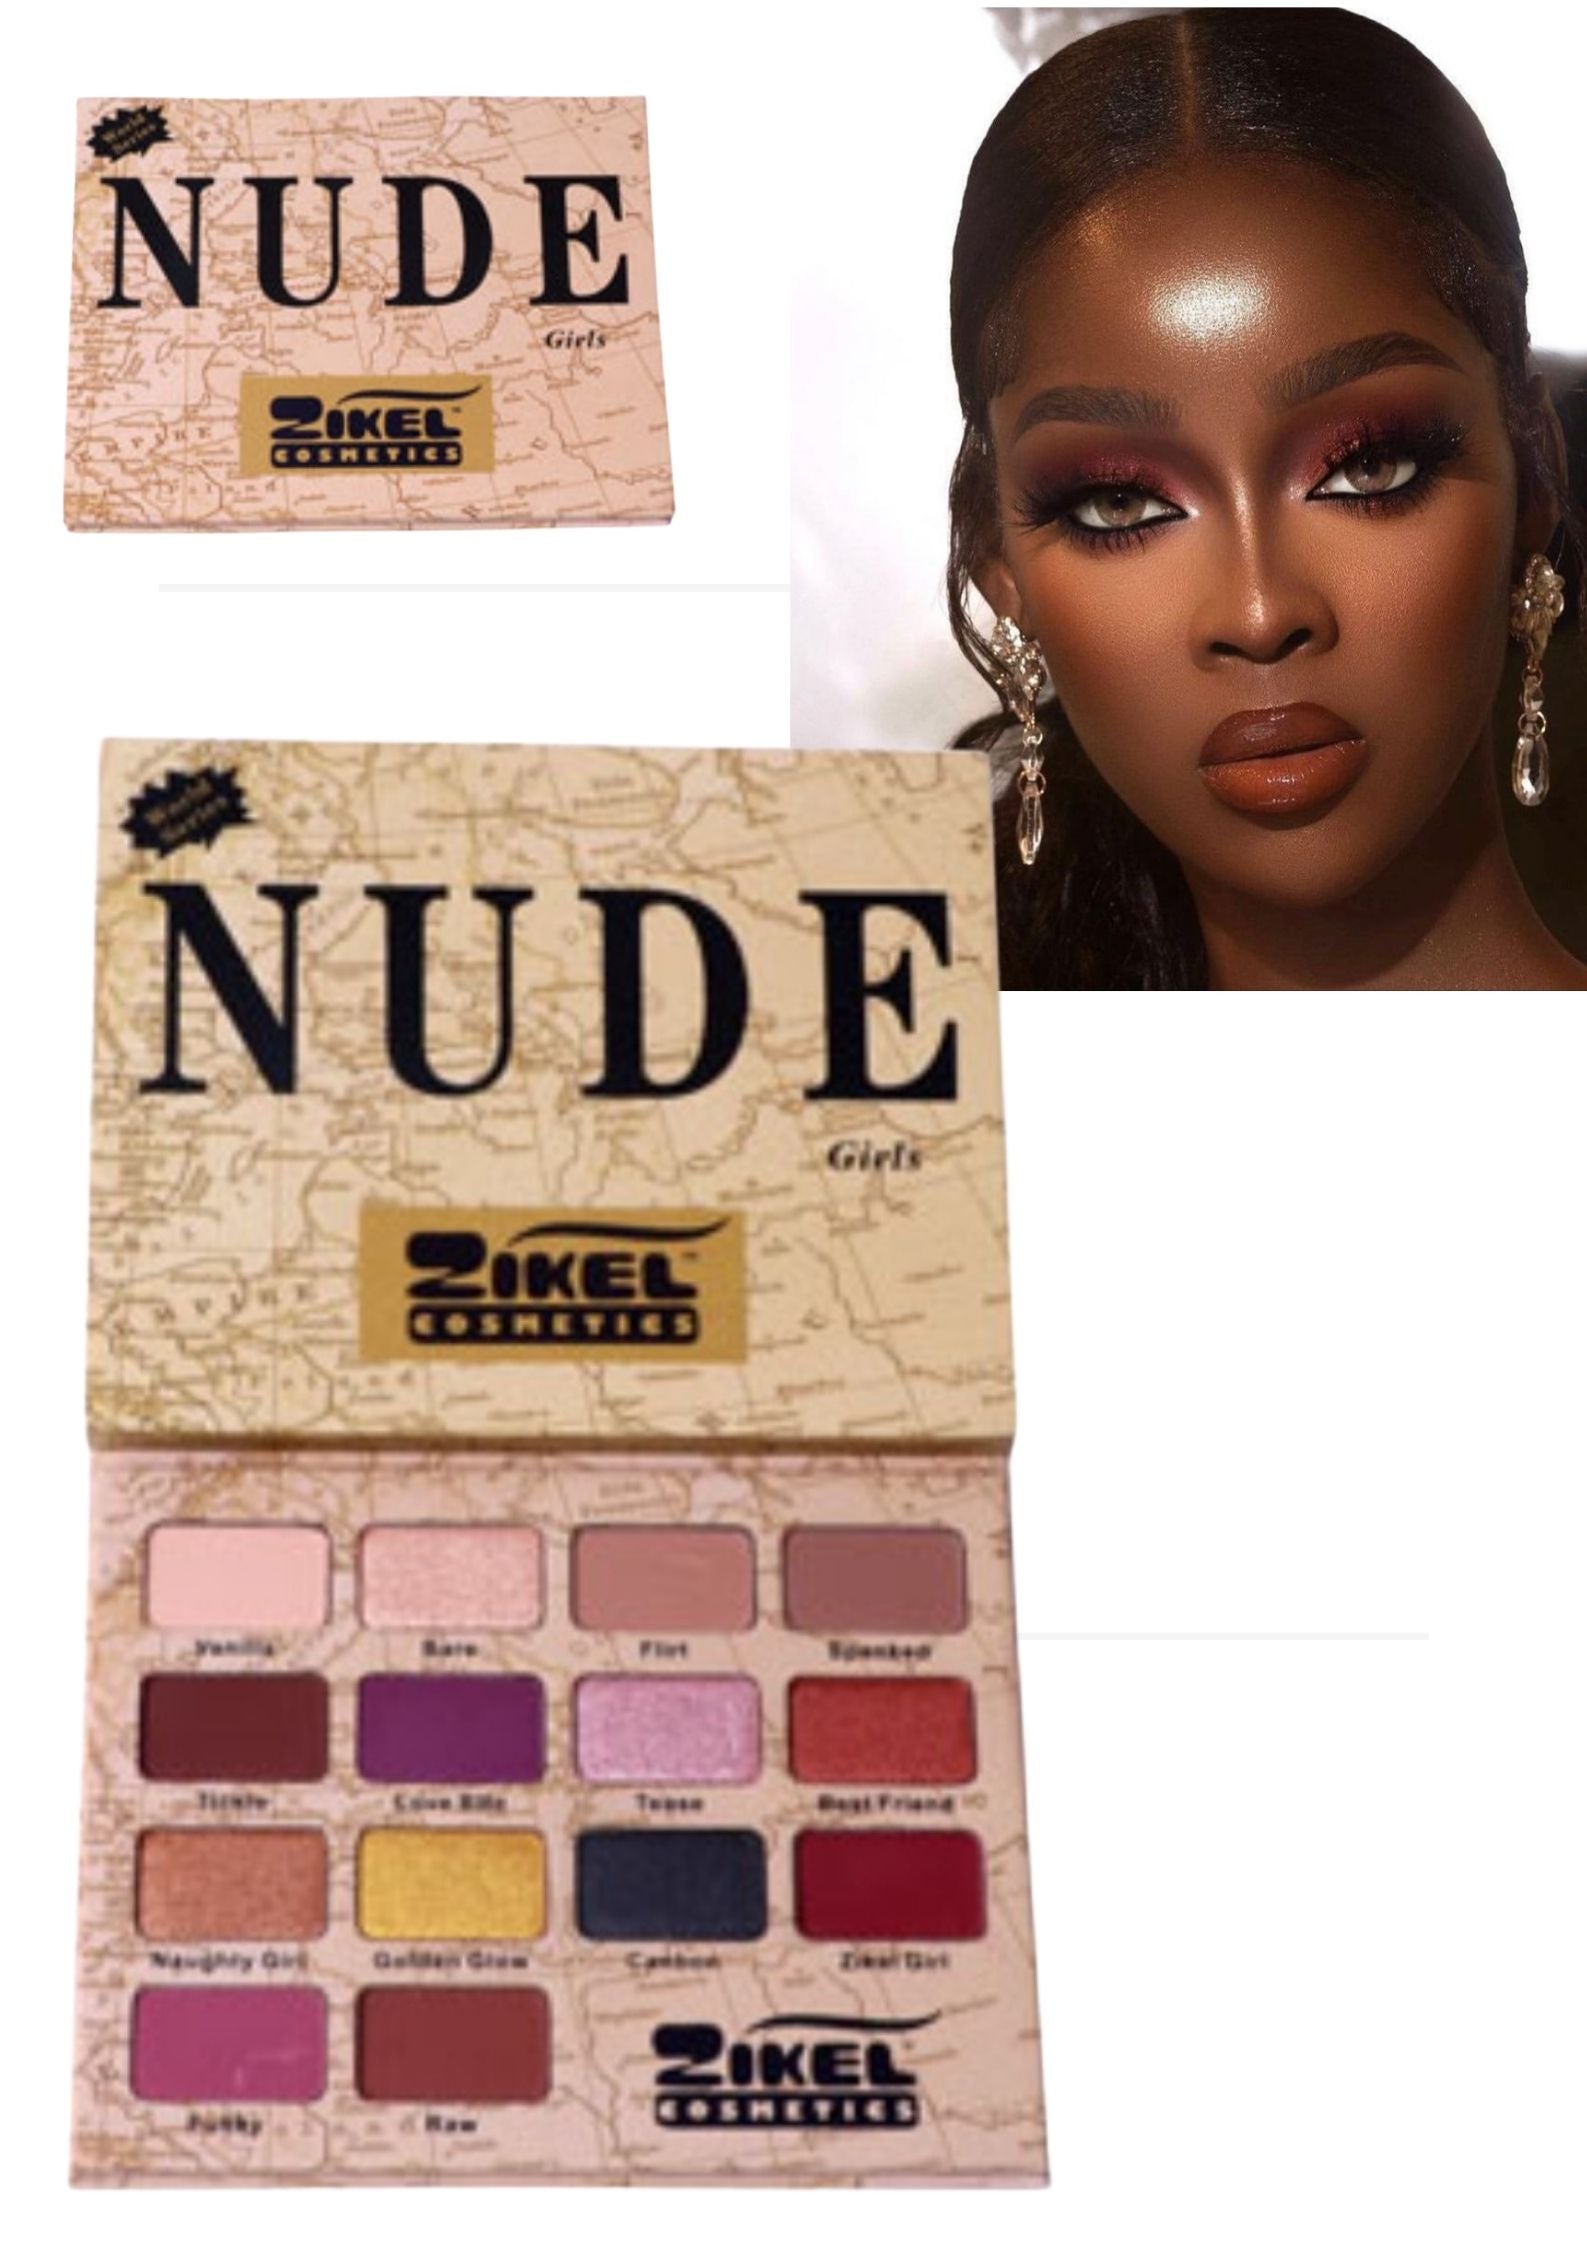 Nude Eyeshadow Pallete Ombretti 14 Color Pressed Shimmer Glitter Matte Eyeshadow - SANDY'S MAKEUP AND ARTISTRY 